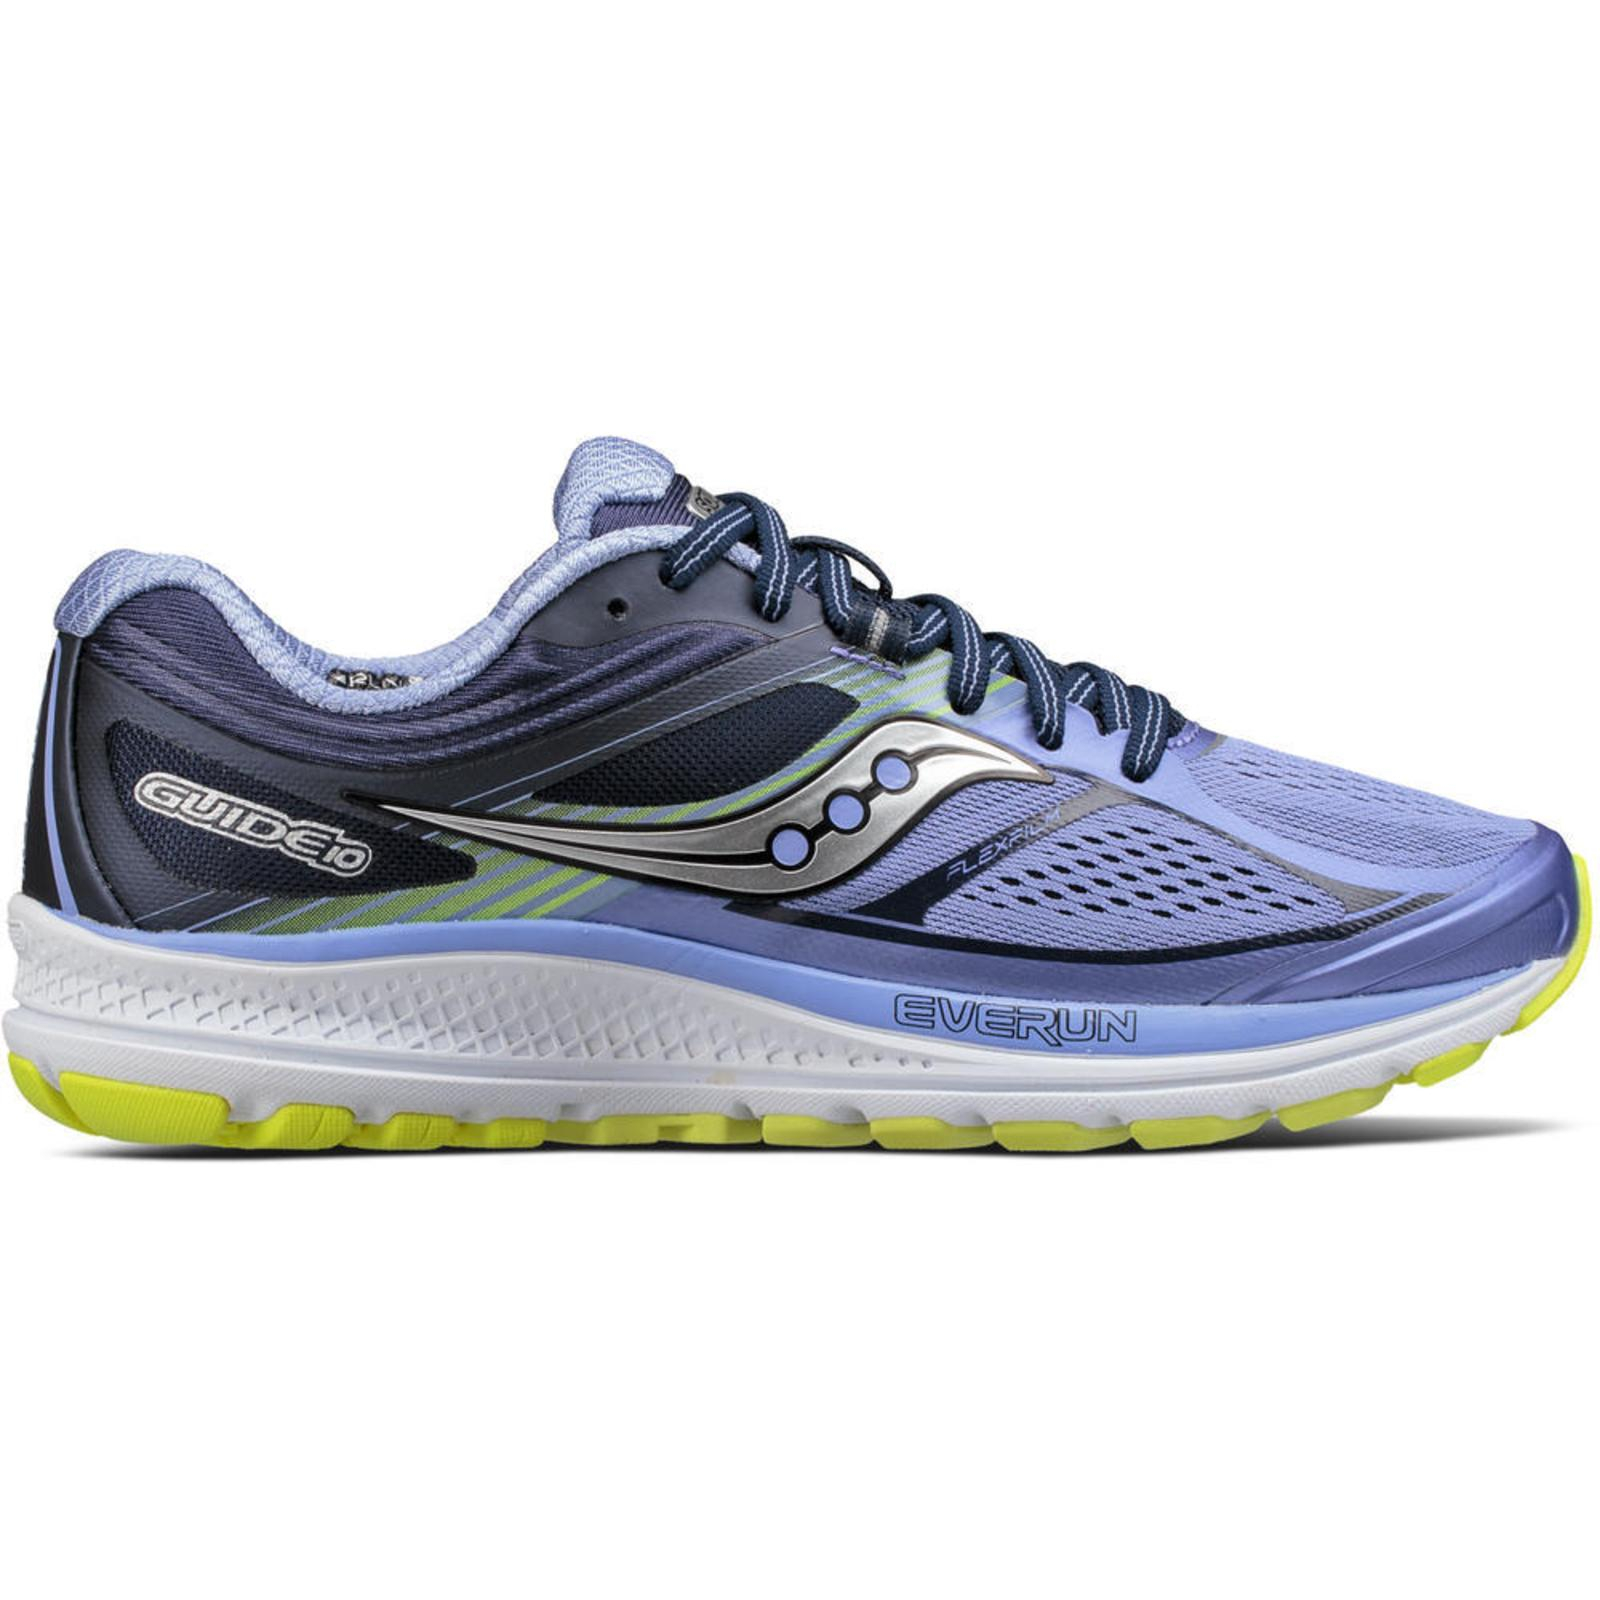 Saucony,Women's Guide 10 Sneakers Runners Running Shoes - Purple/Navy ...